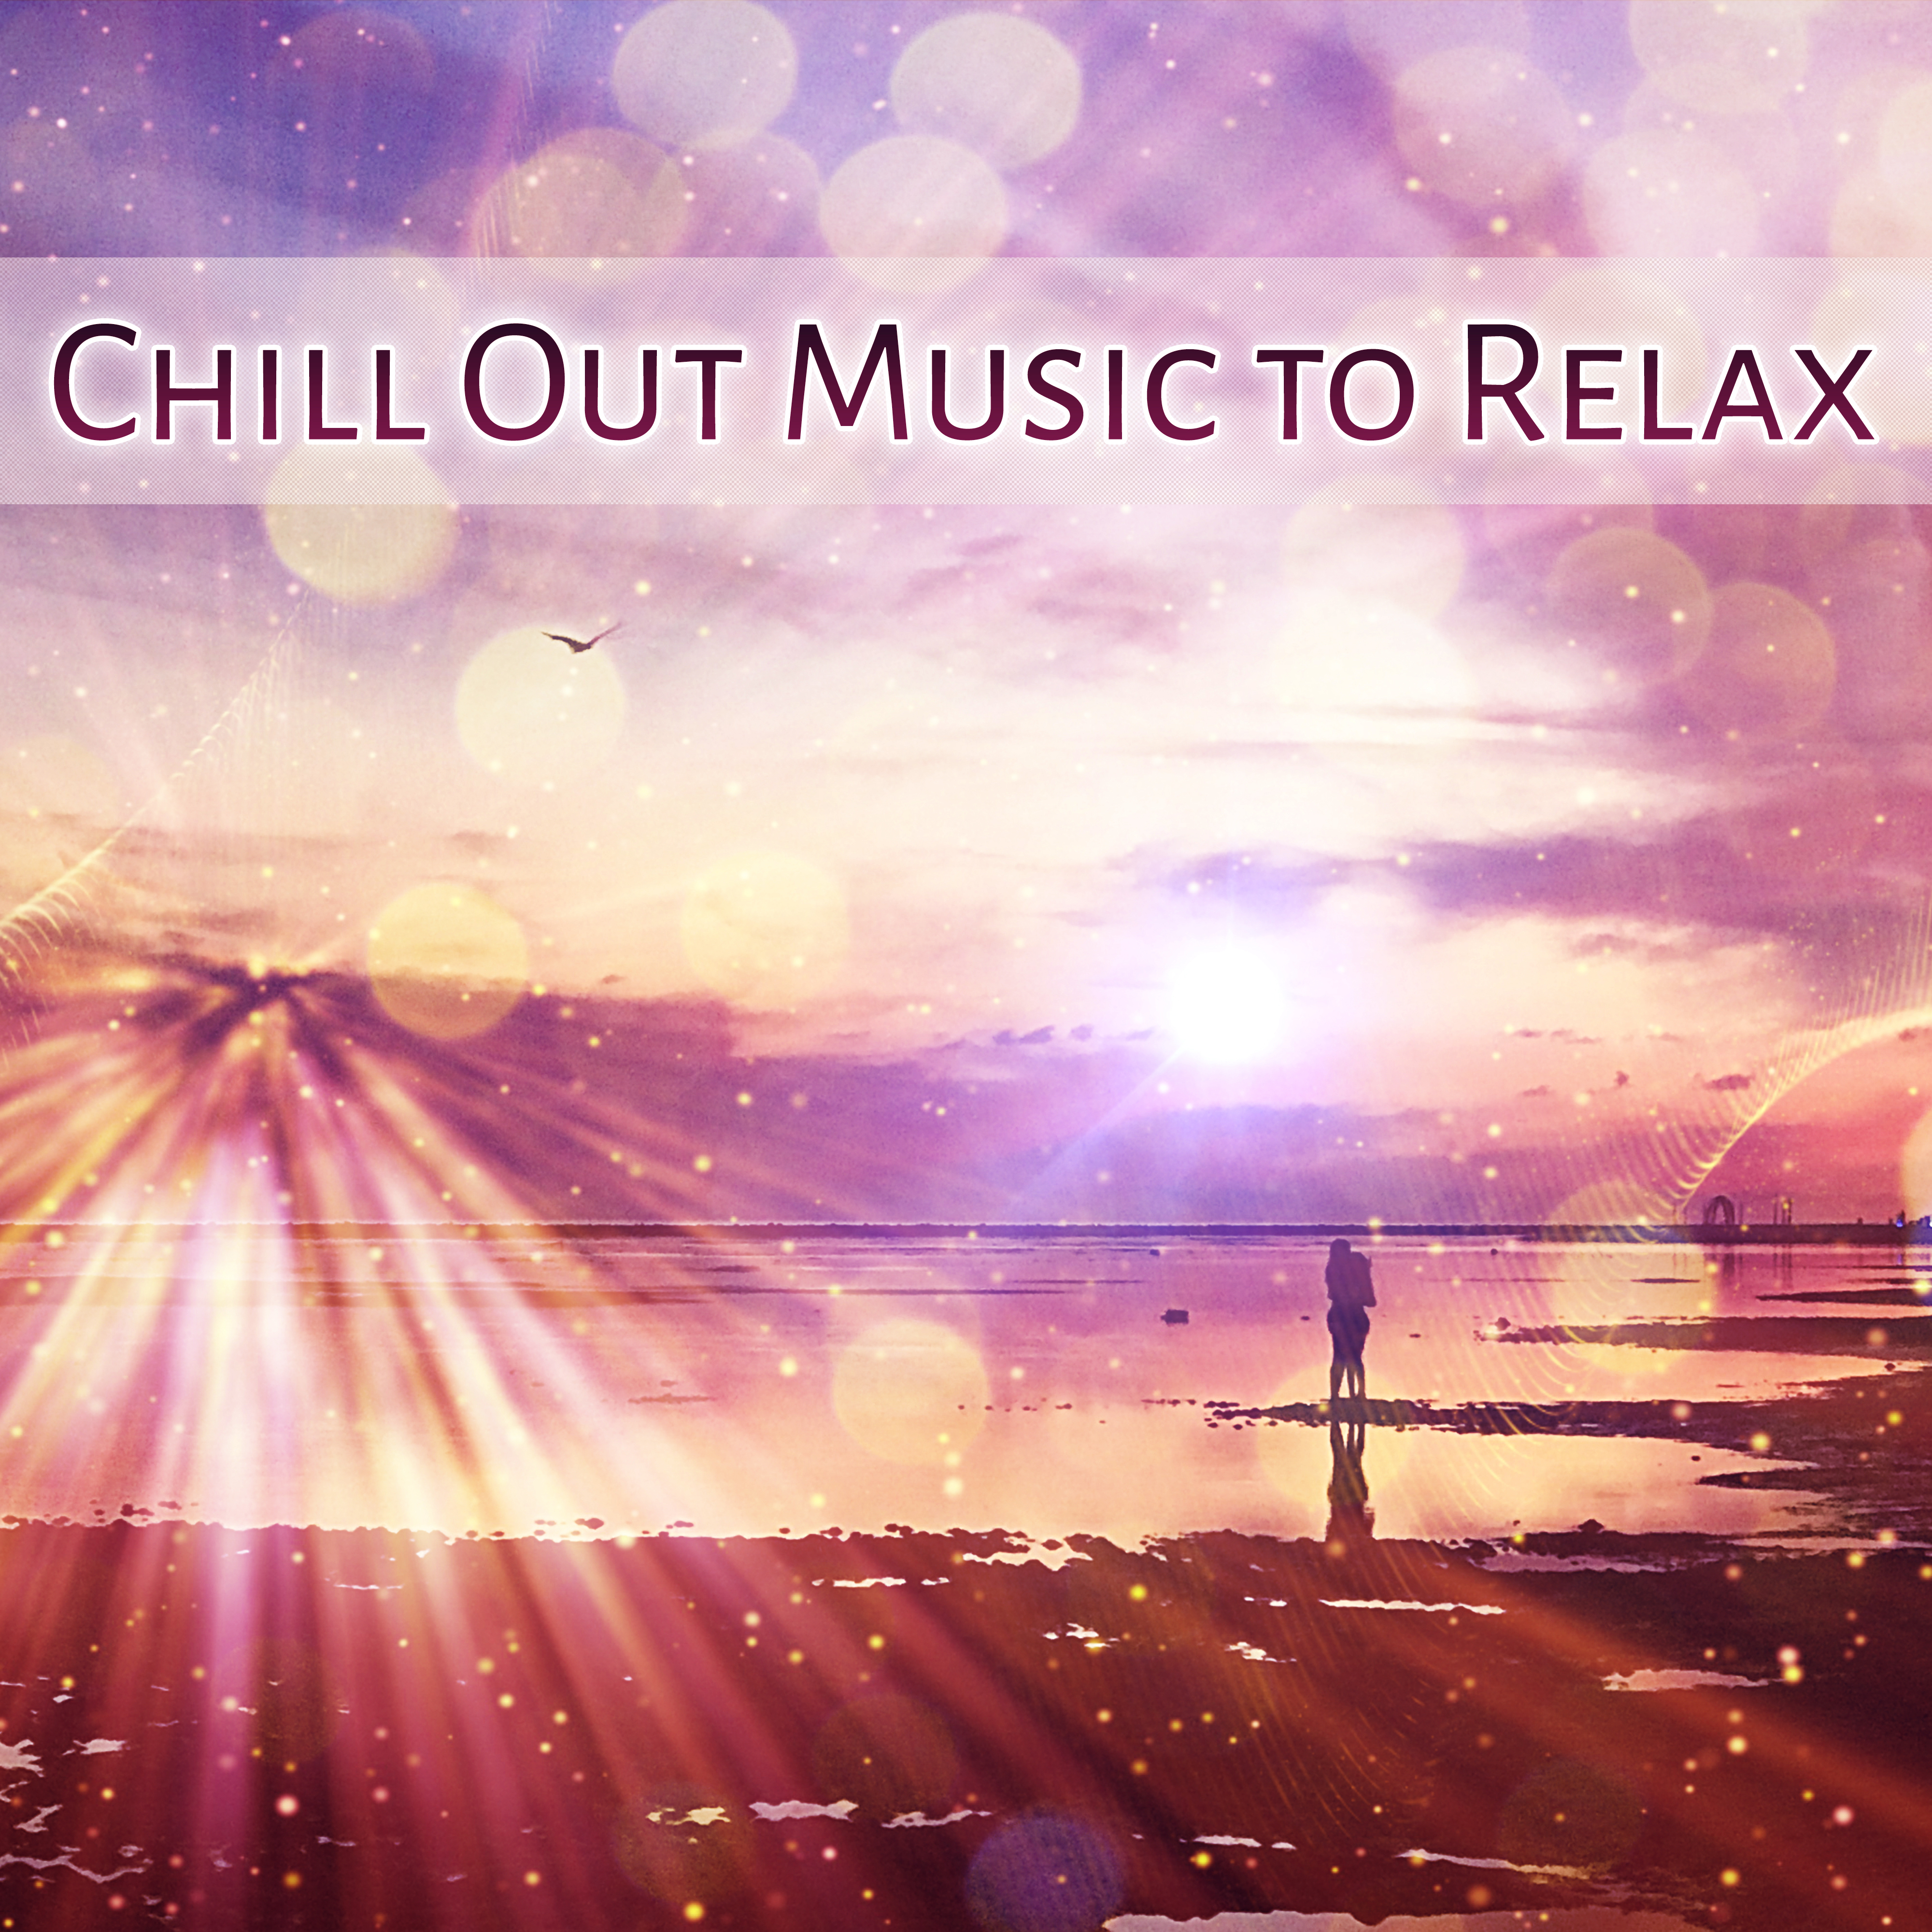 Chill Out Music to Relax  Easy Listening, Beach Relaxation, Rest with Calm Music, Soft Sounds